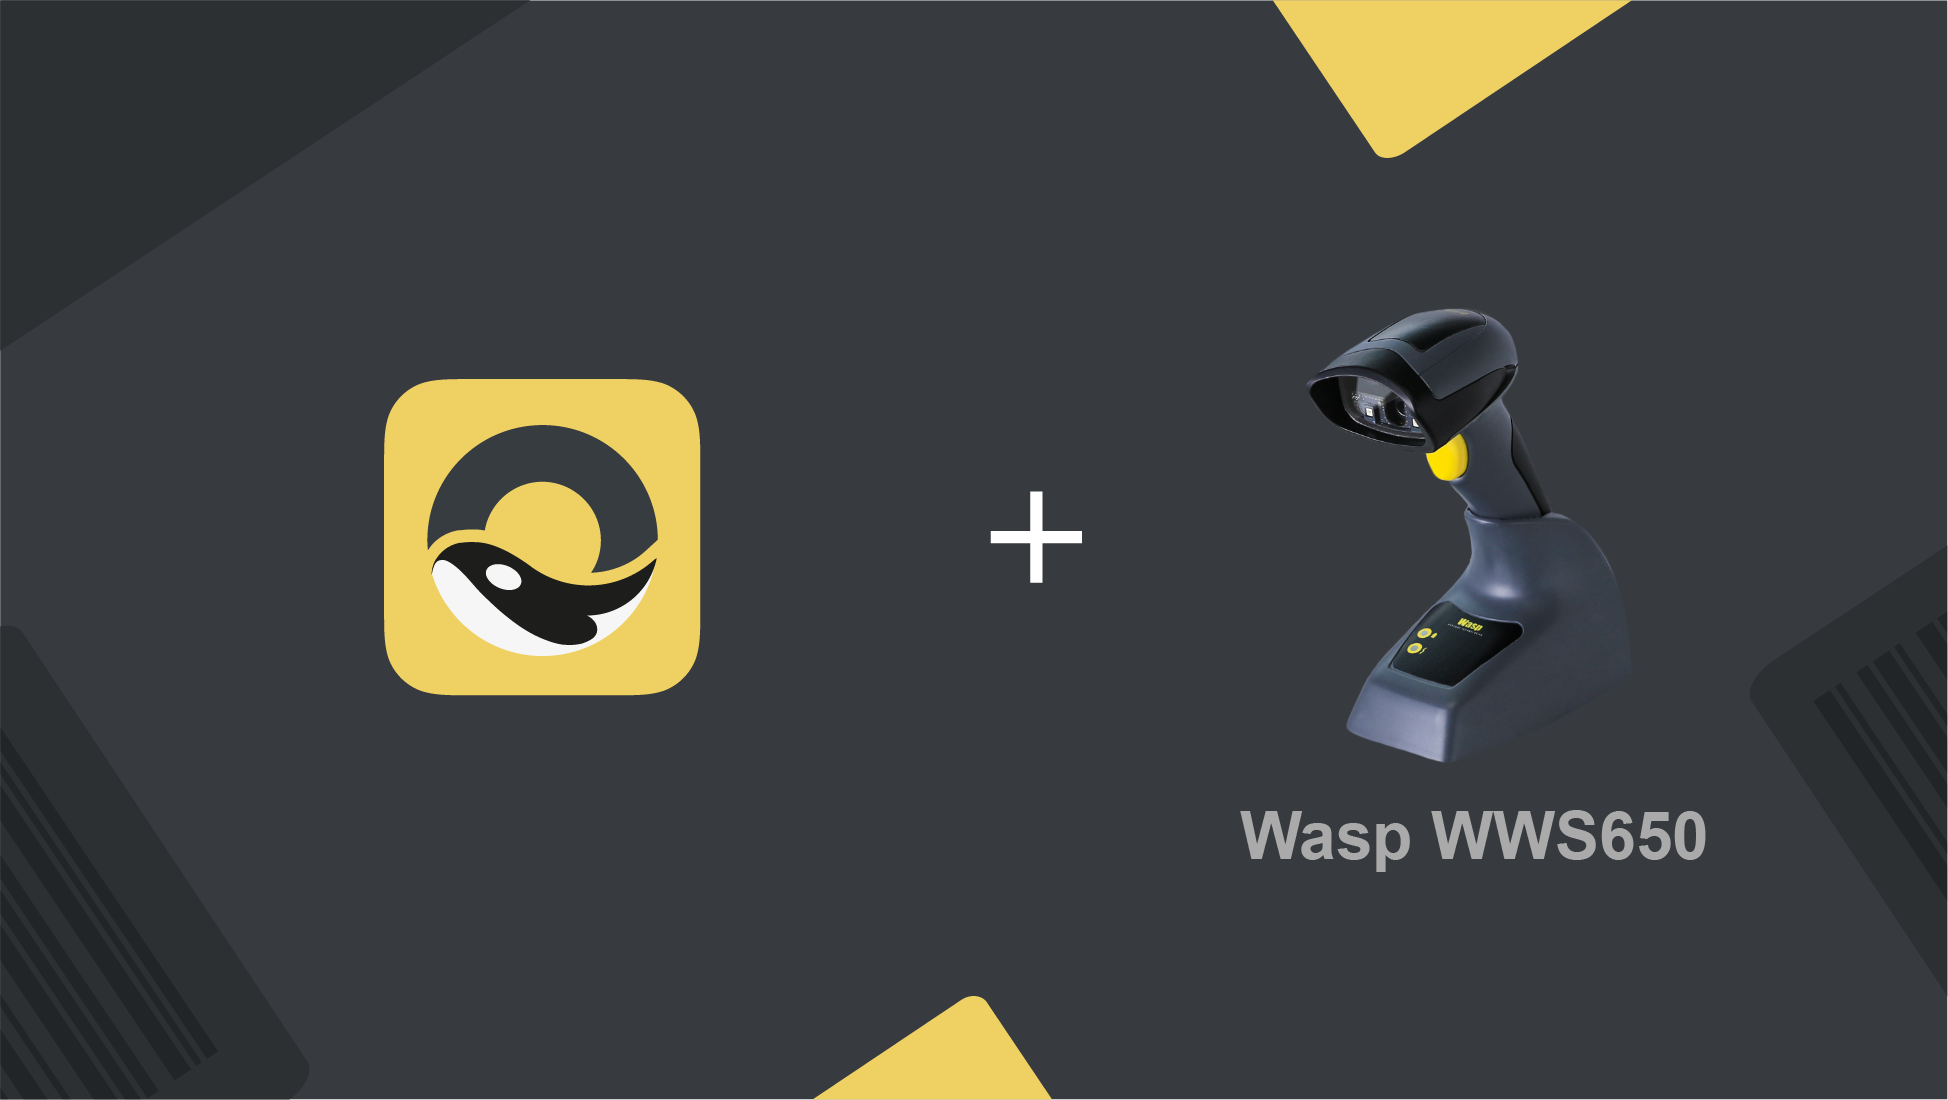 Using the Wasp WWS650 scanner with Orca Scan